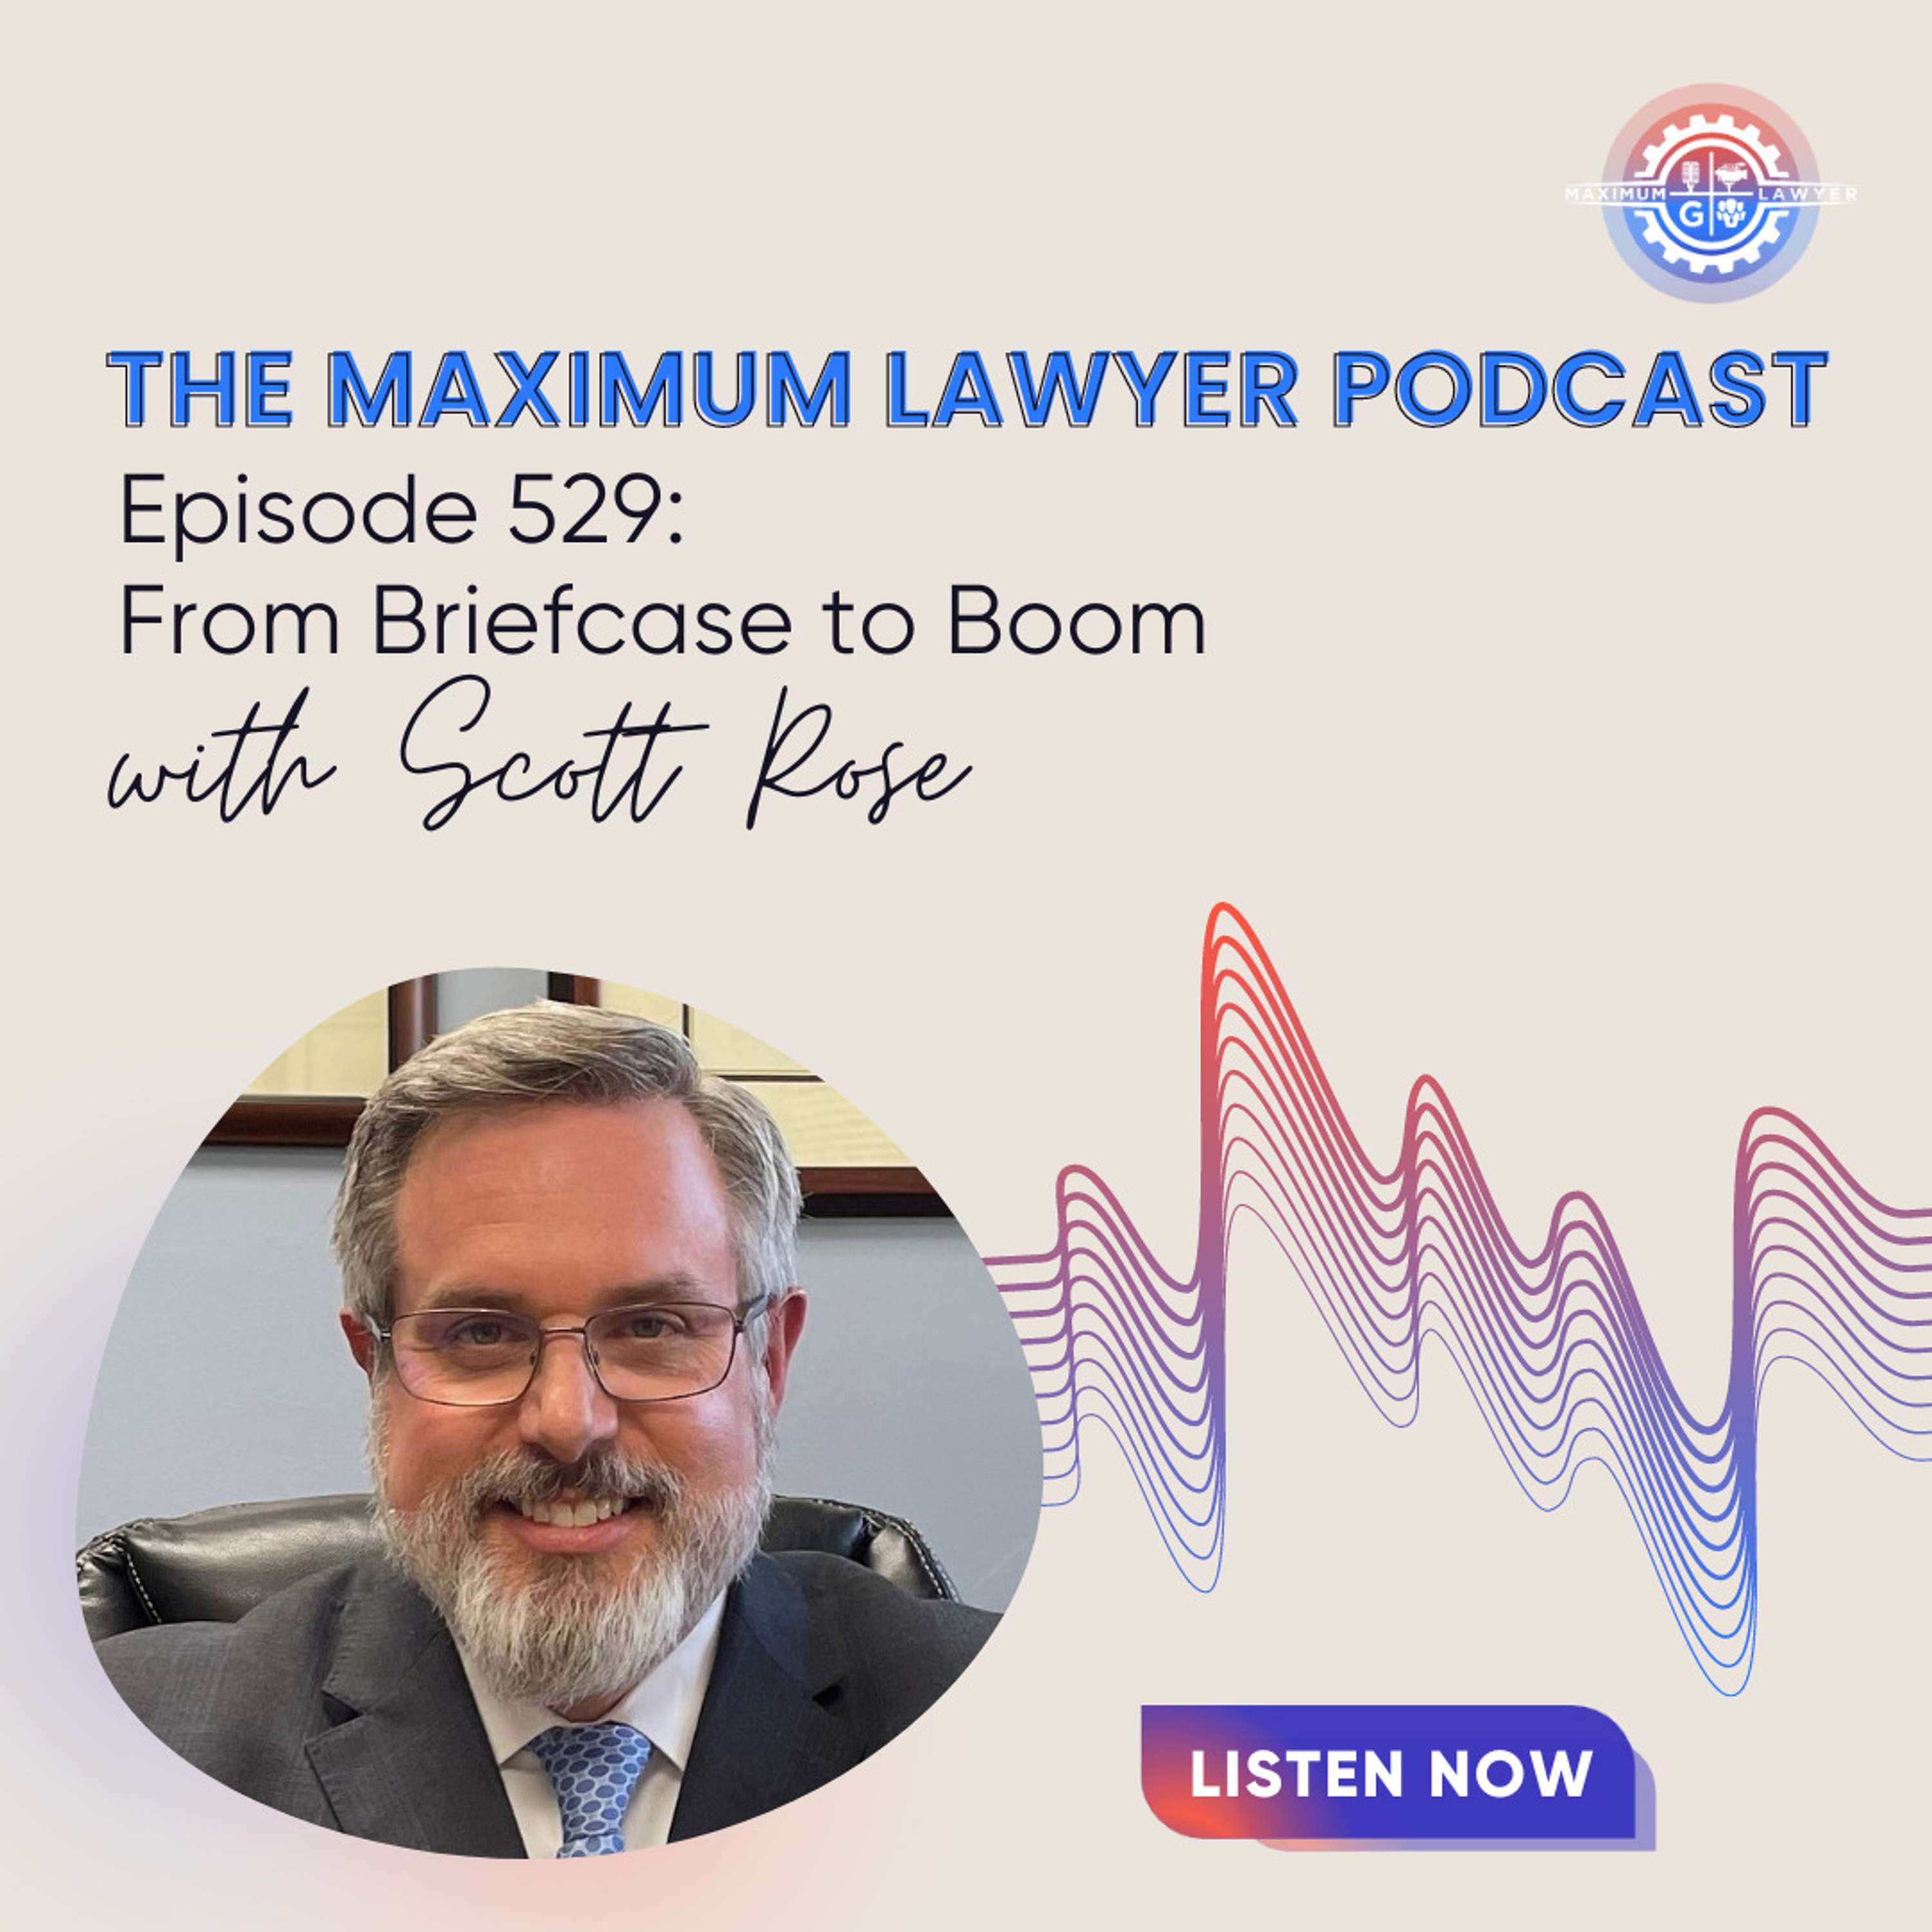 From Briefcase to Boom with Scott Rose